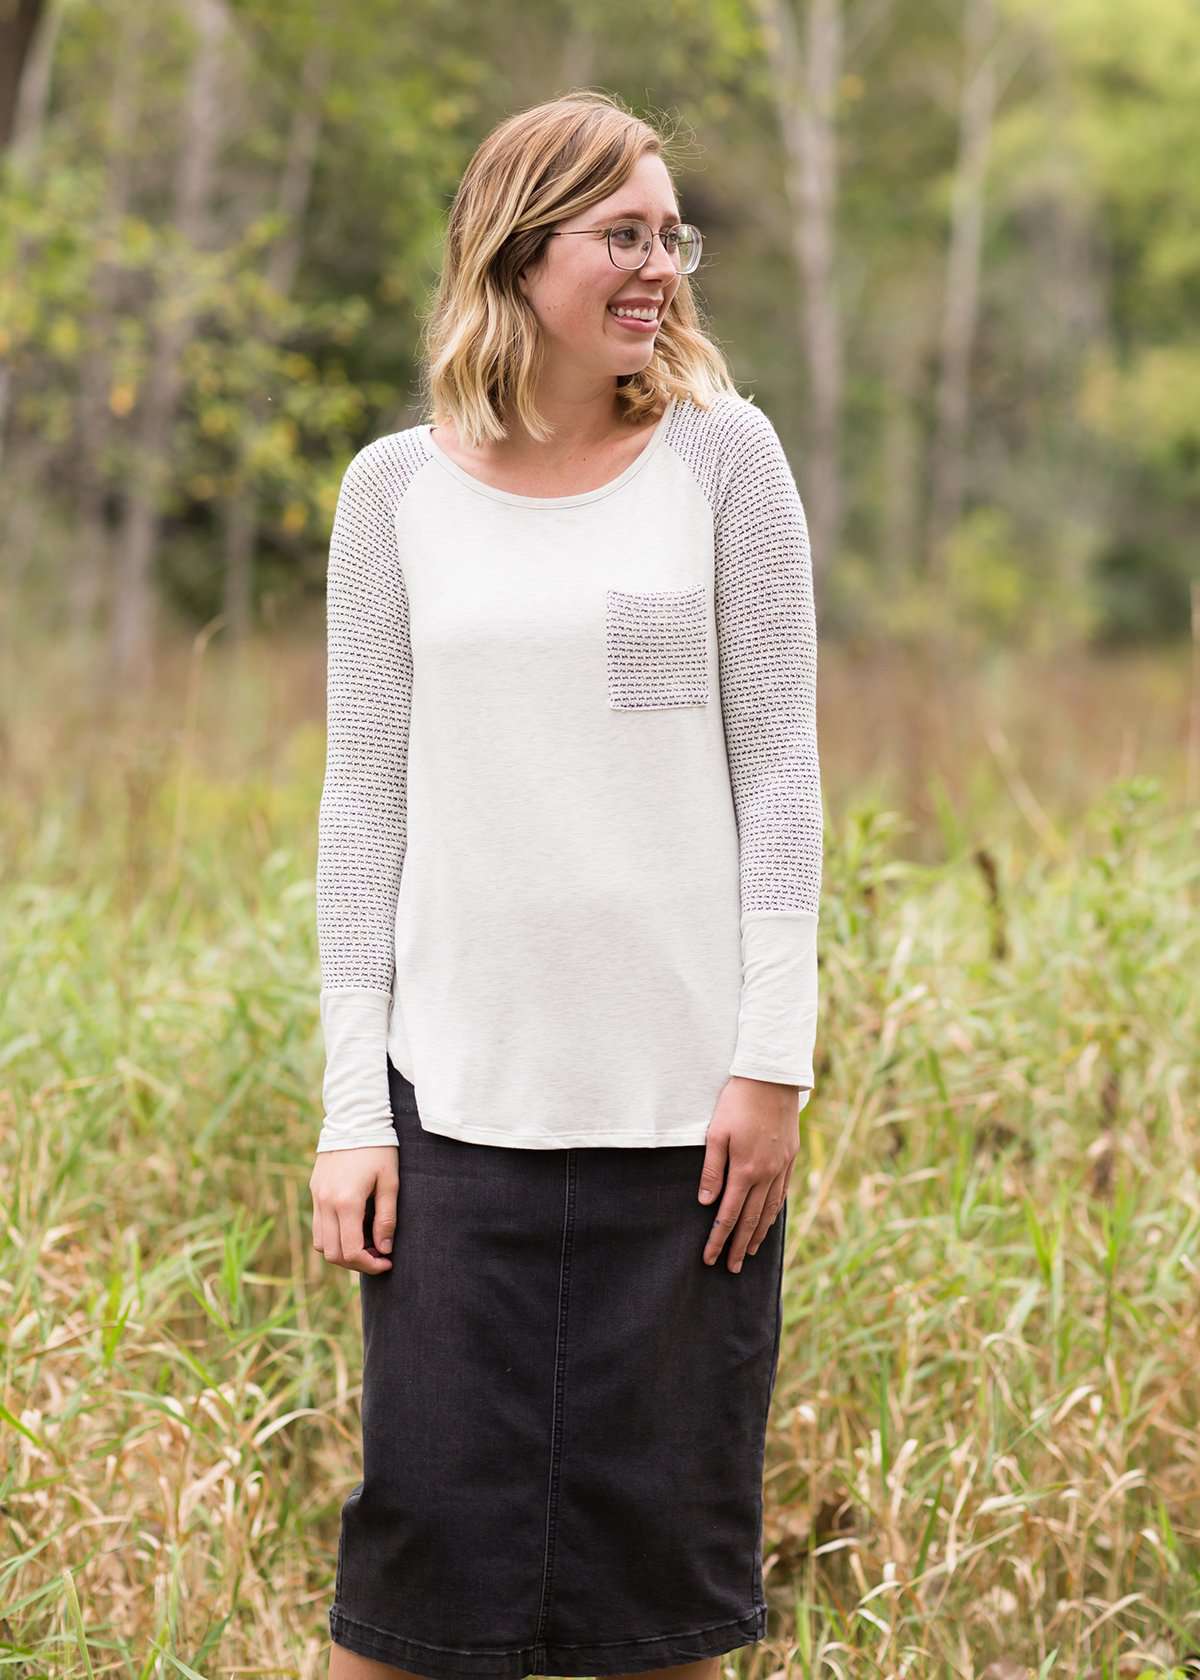 White top with grey contrast long sleeves and front pocket.